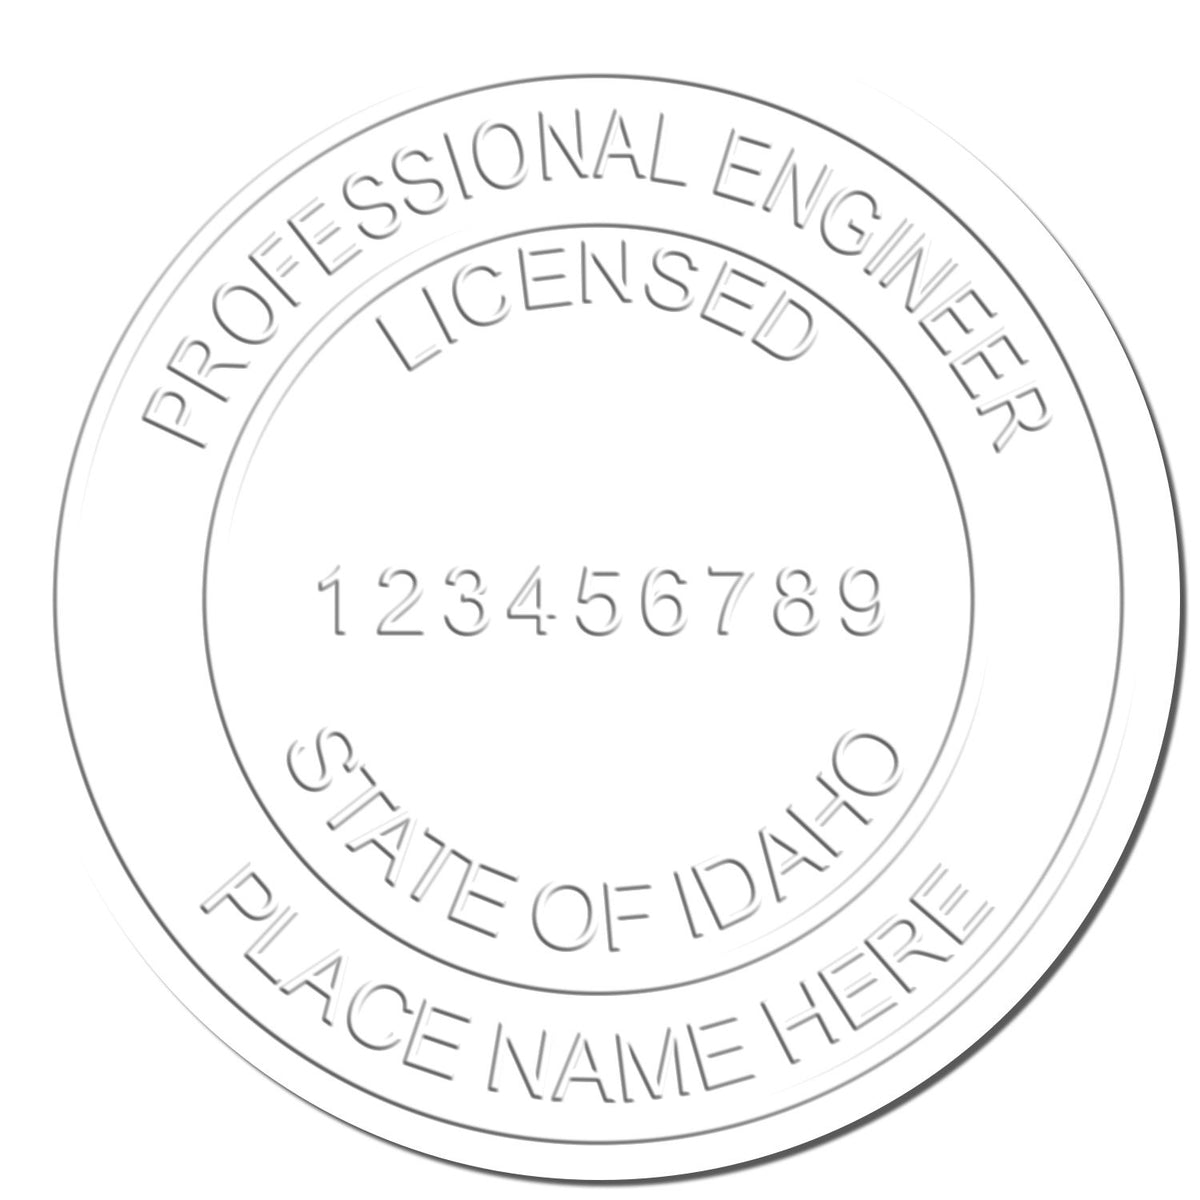 The Soft Idaho Professional Engineer Seal stamp impression comes to life with a crisp, detailed photo on paper - showcasing true professional quality.